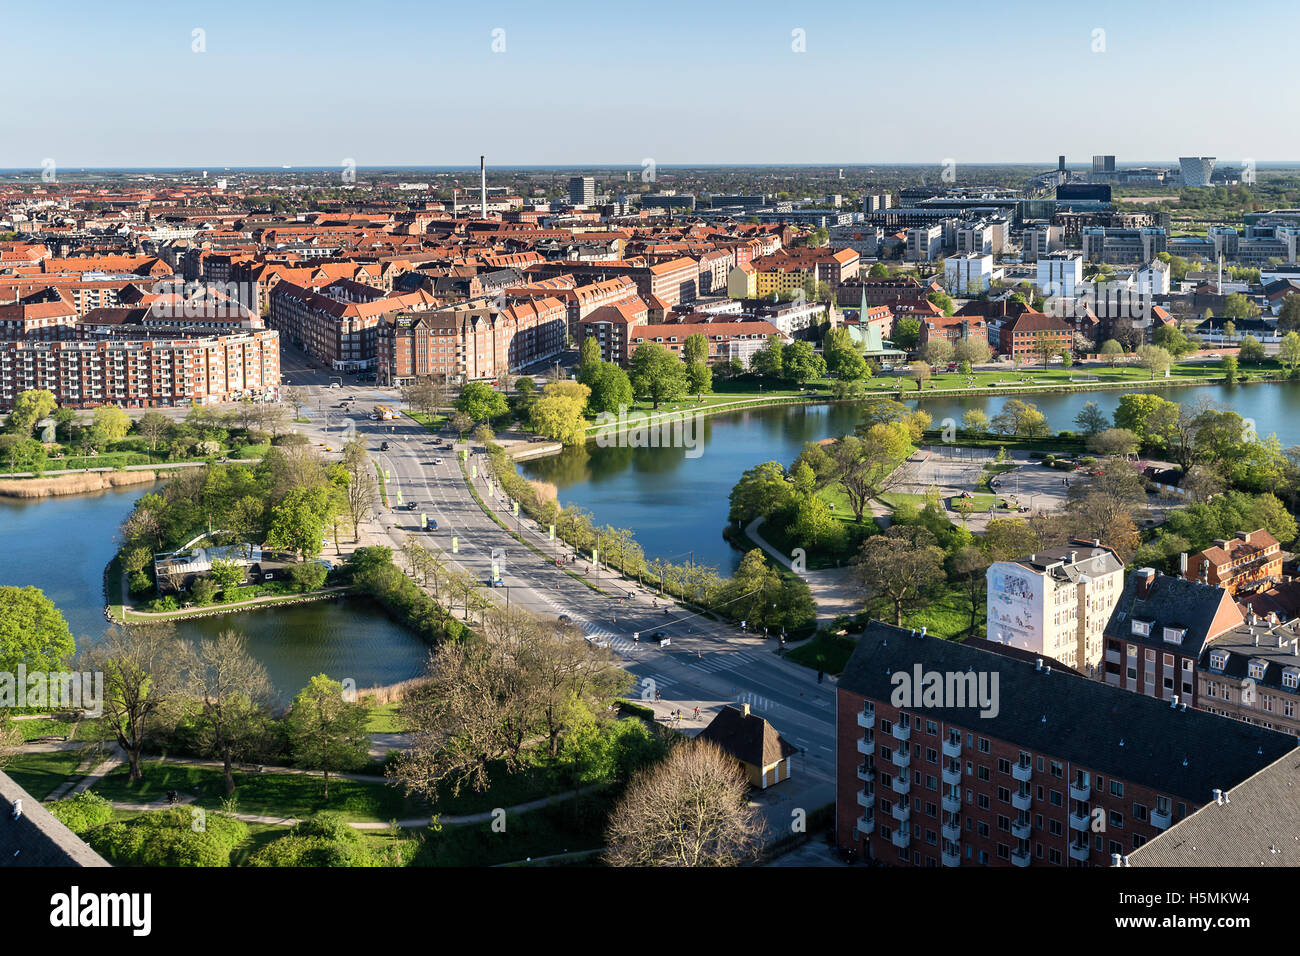 Areal view of Copenhagen, Denmark, with Knippel Bribge (Knippelsbro) and inner harbor canal Stock Photo